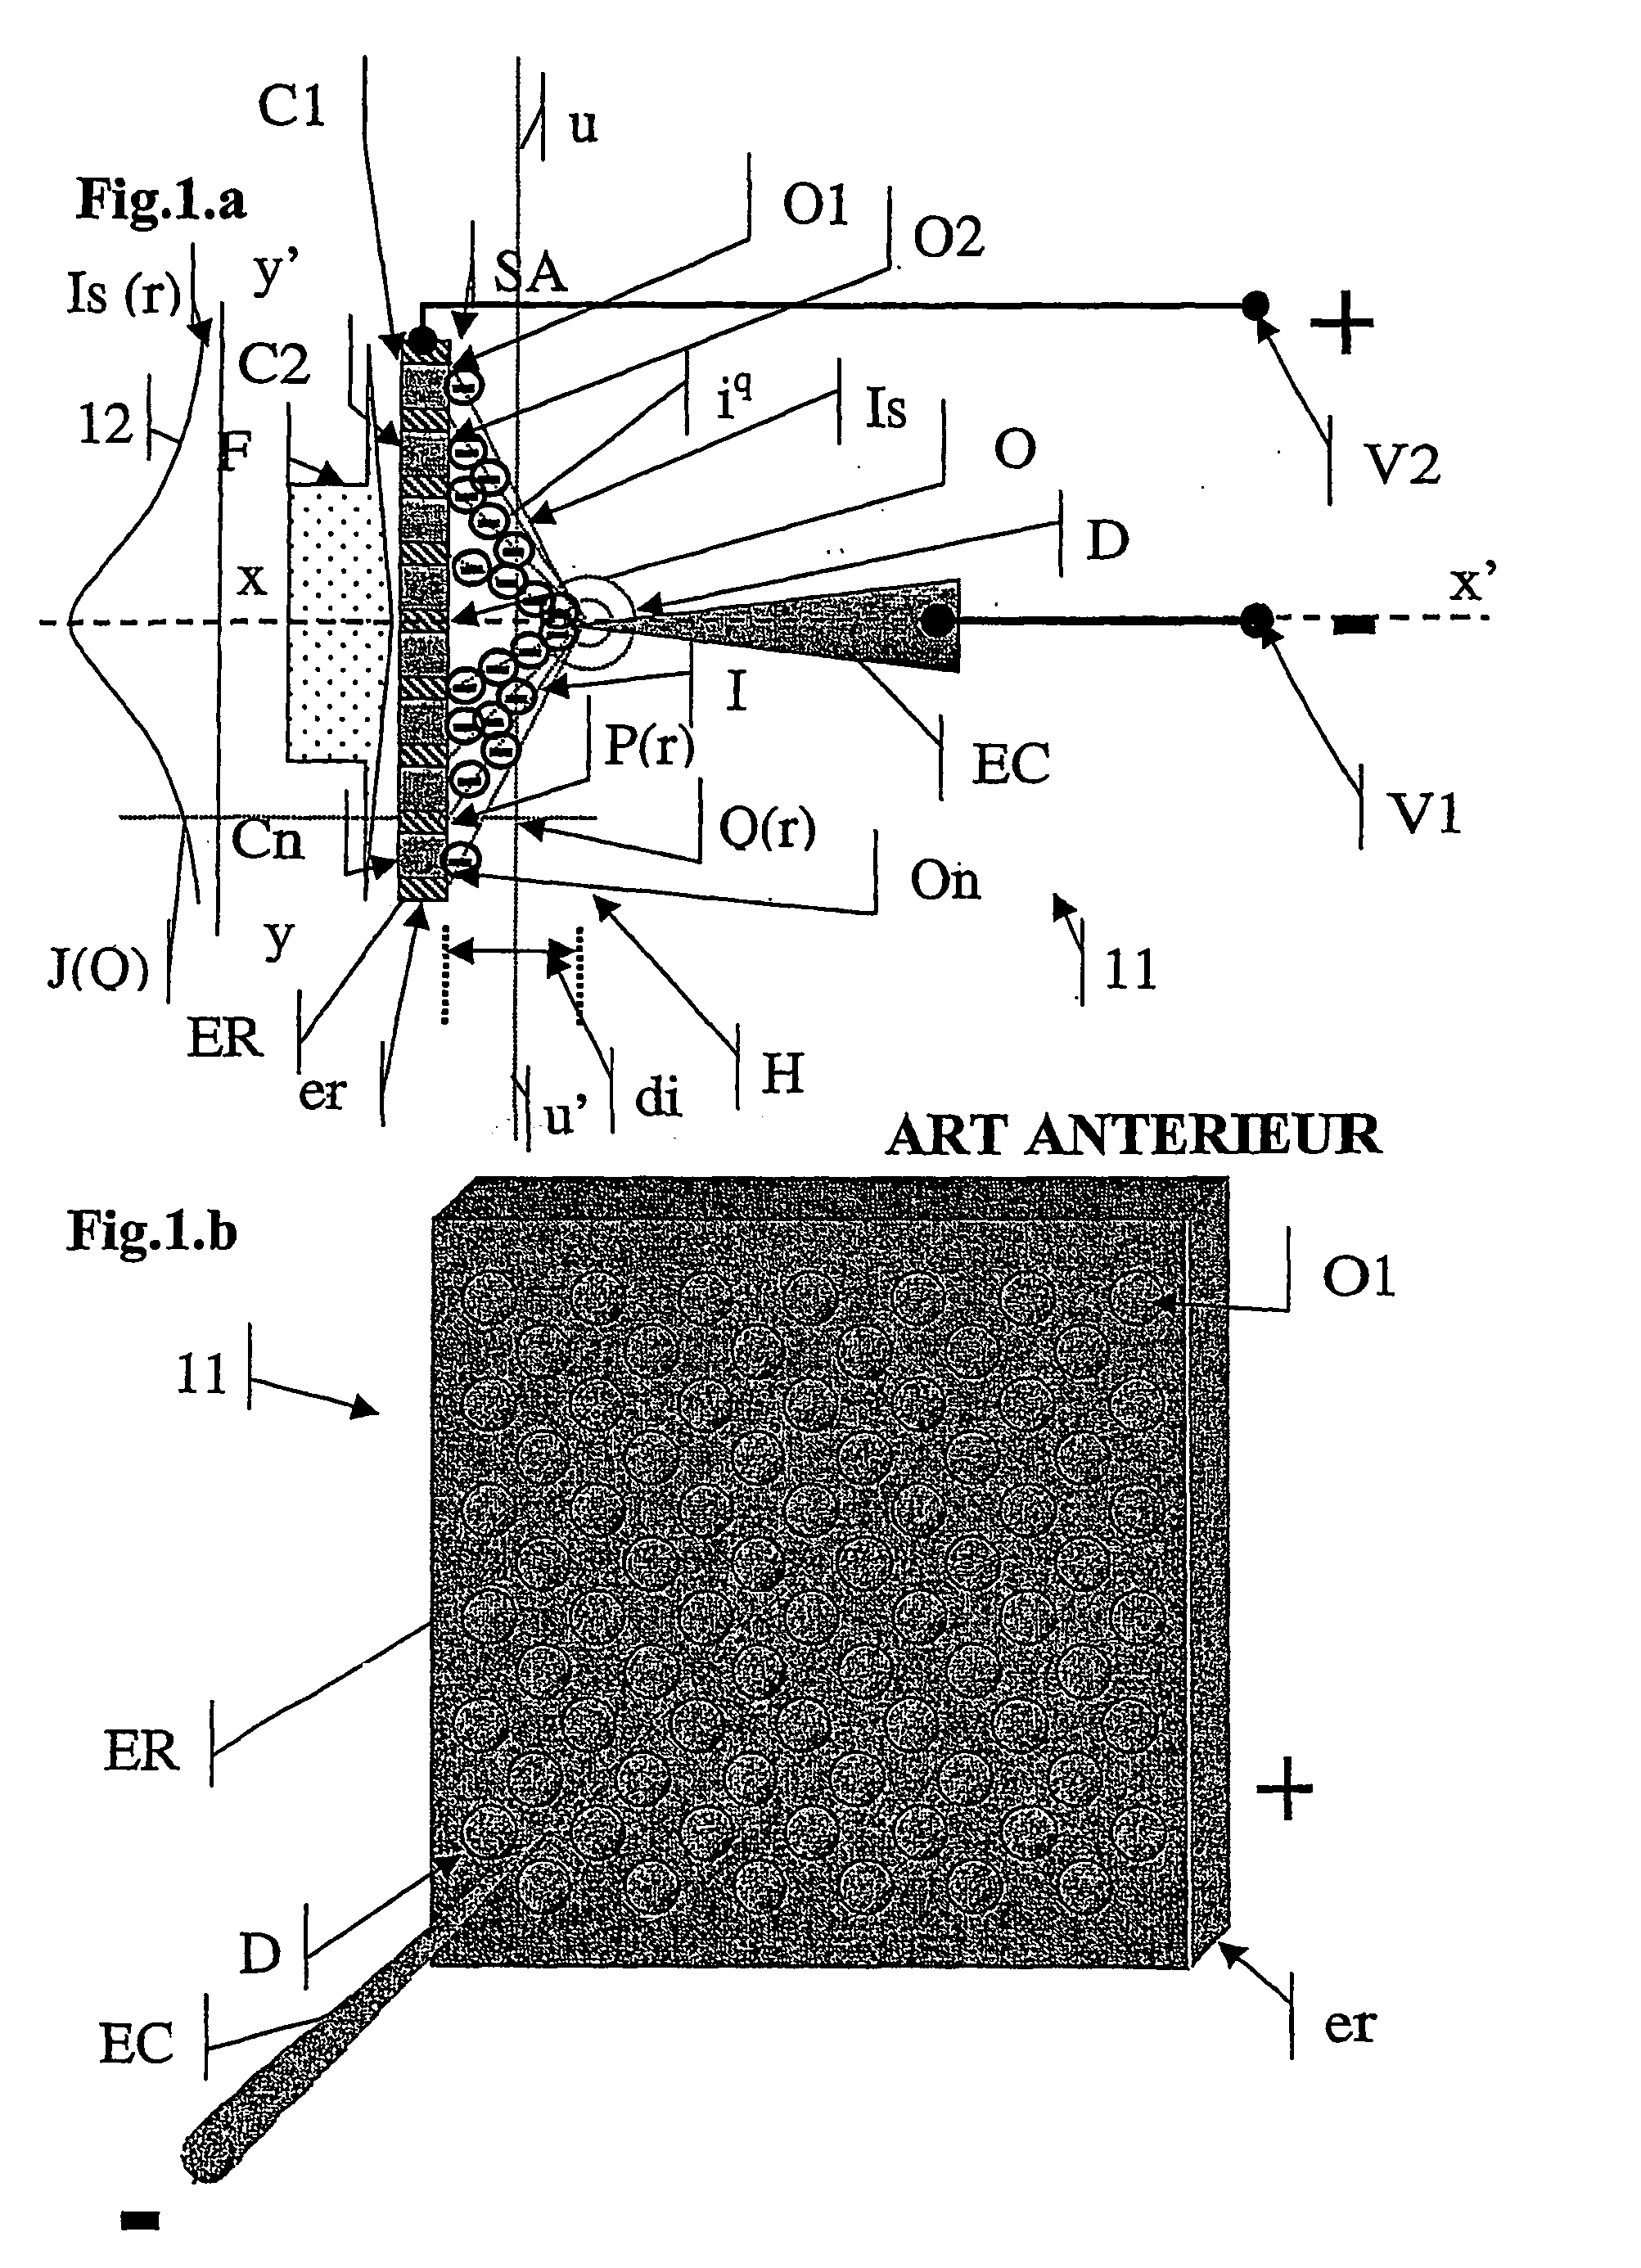 Electrostatic device for ionic air emission